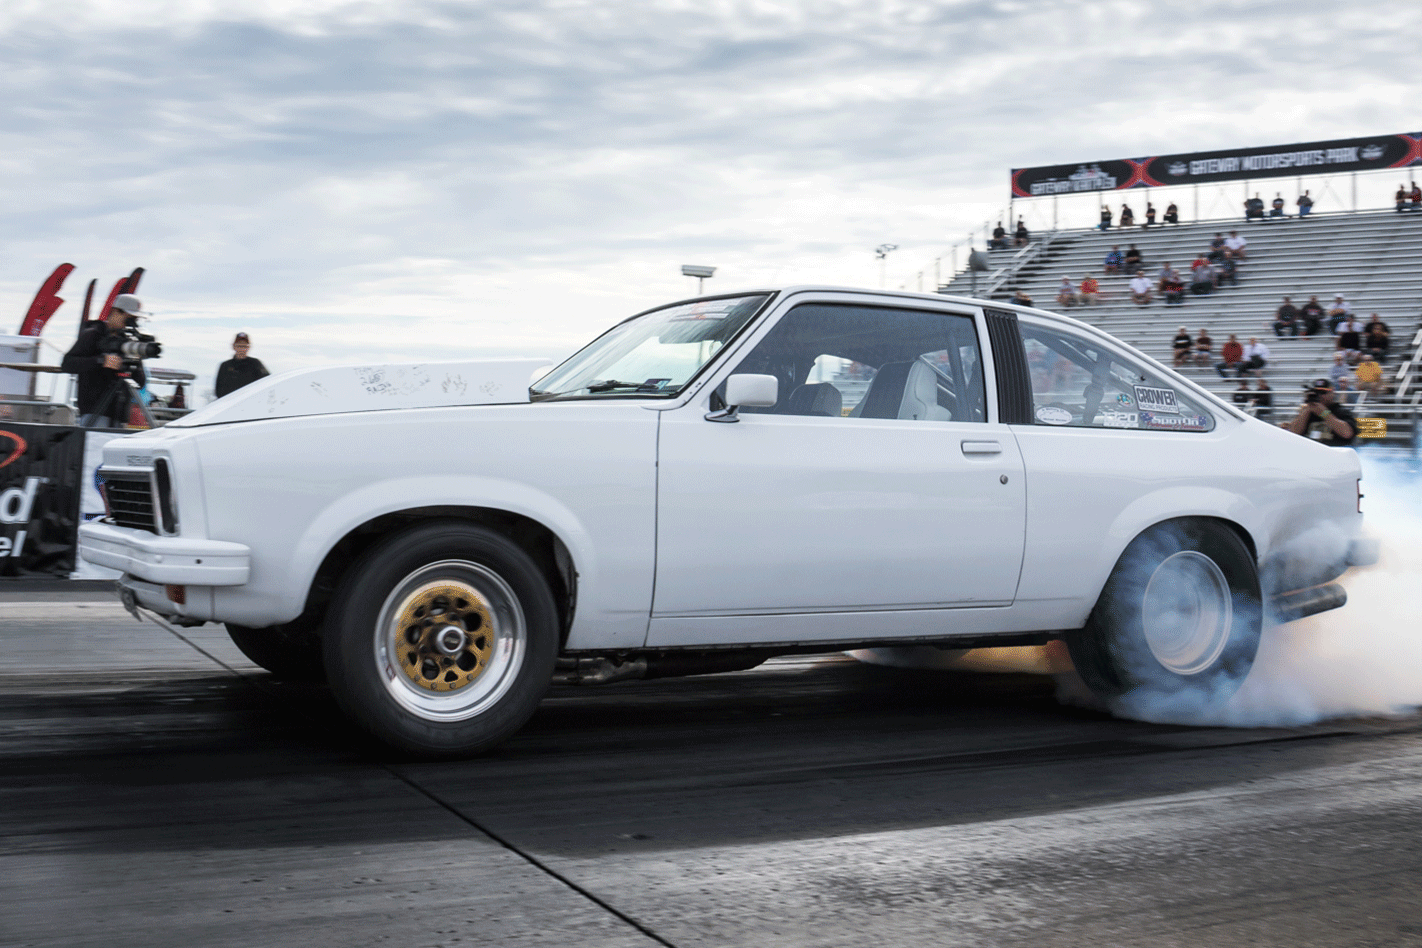 DRAG WEEK 2017 DAY TWO – THE MOVIE